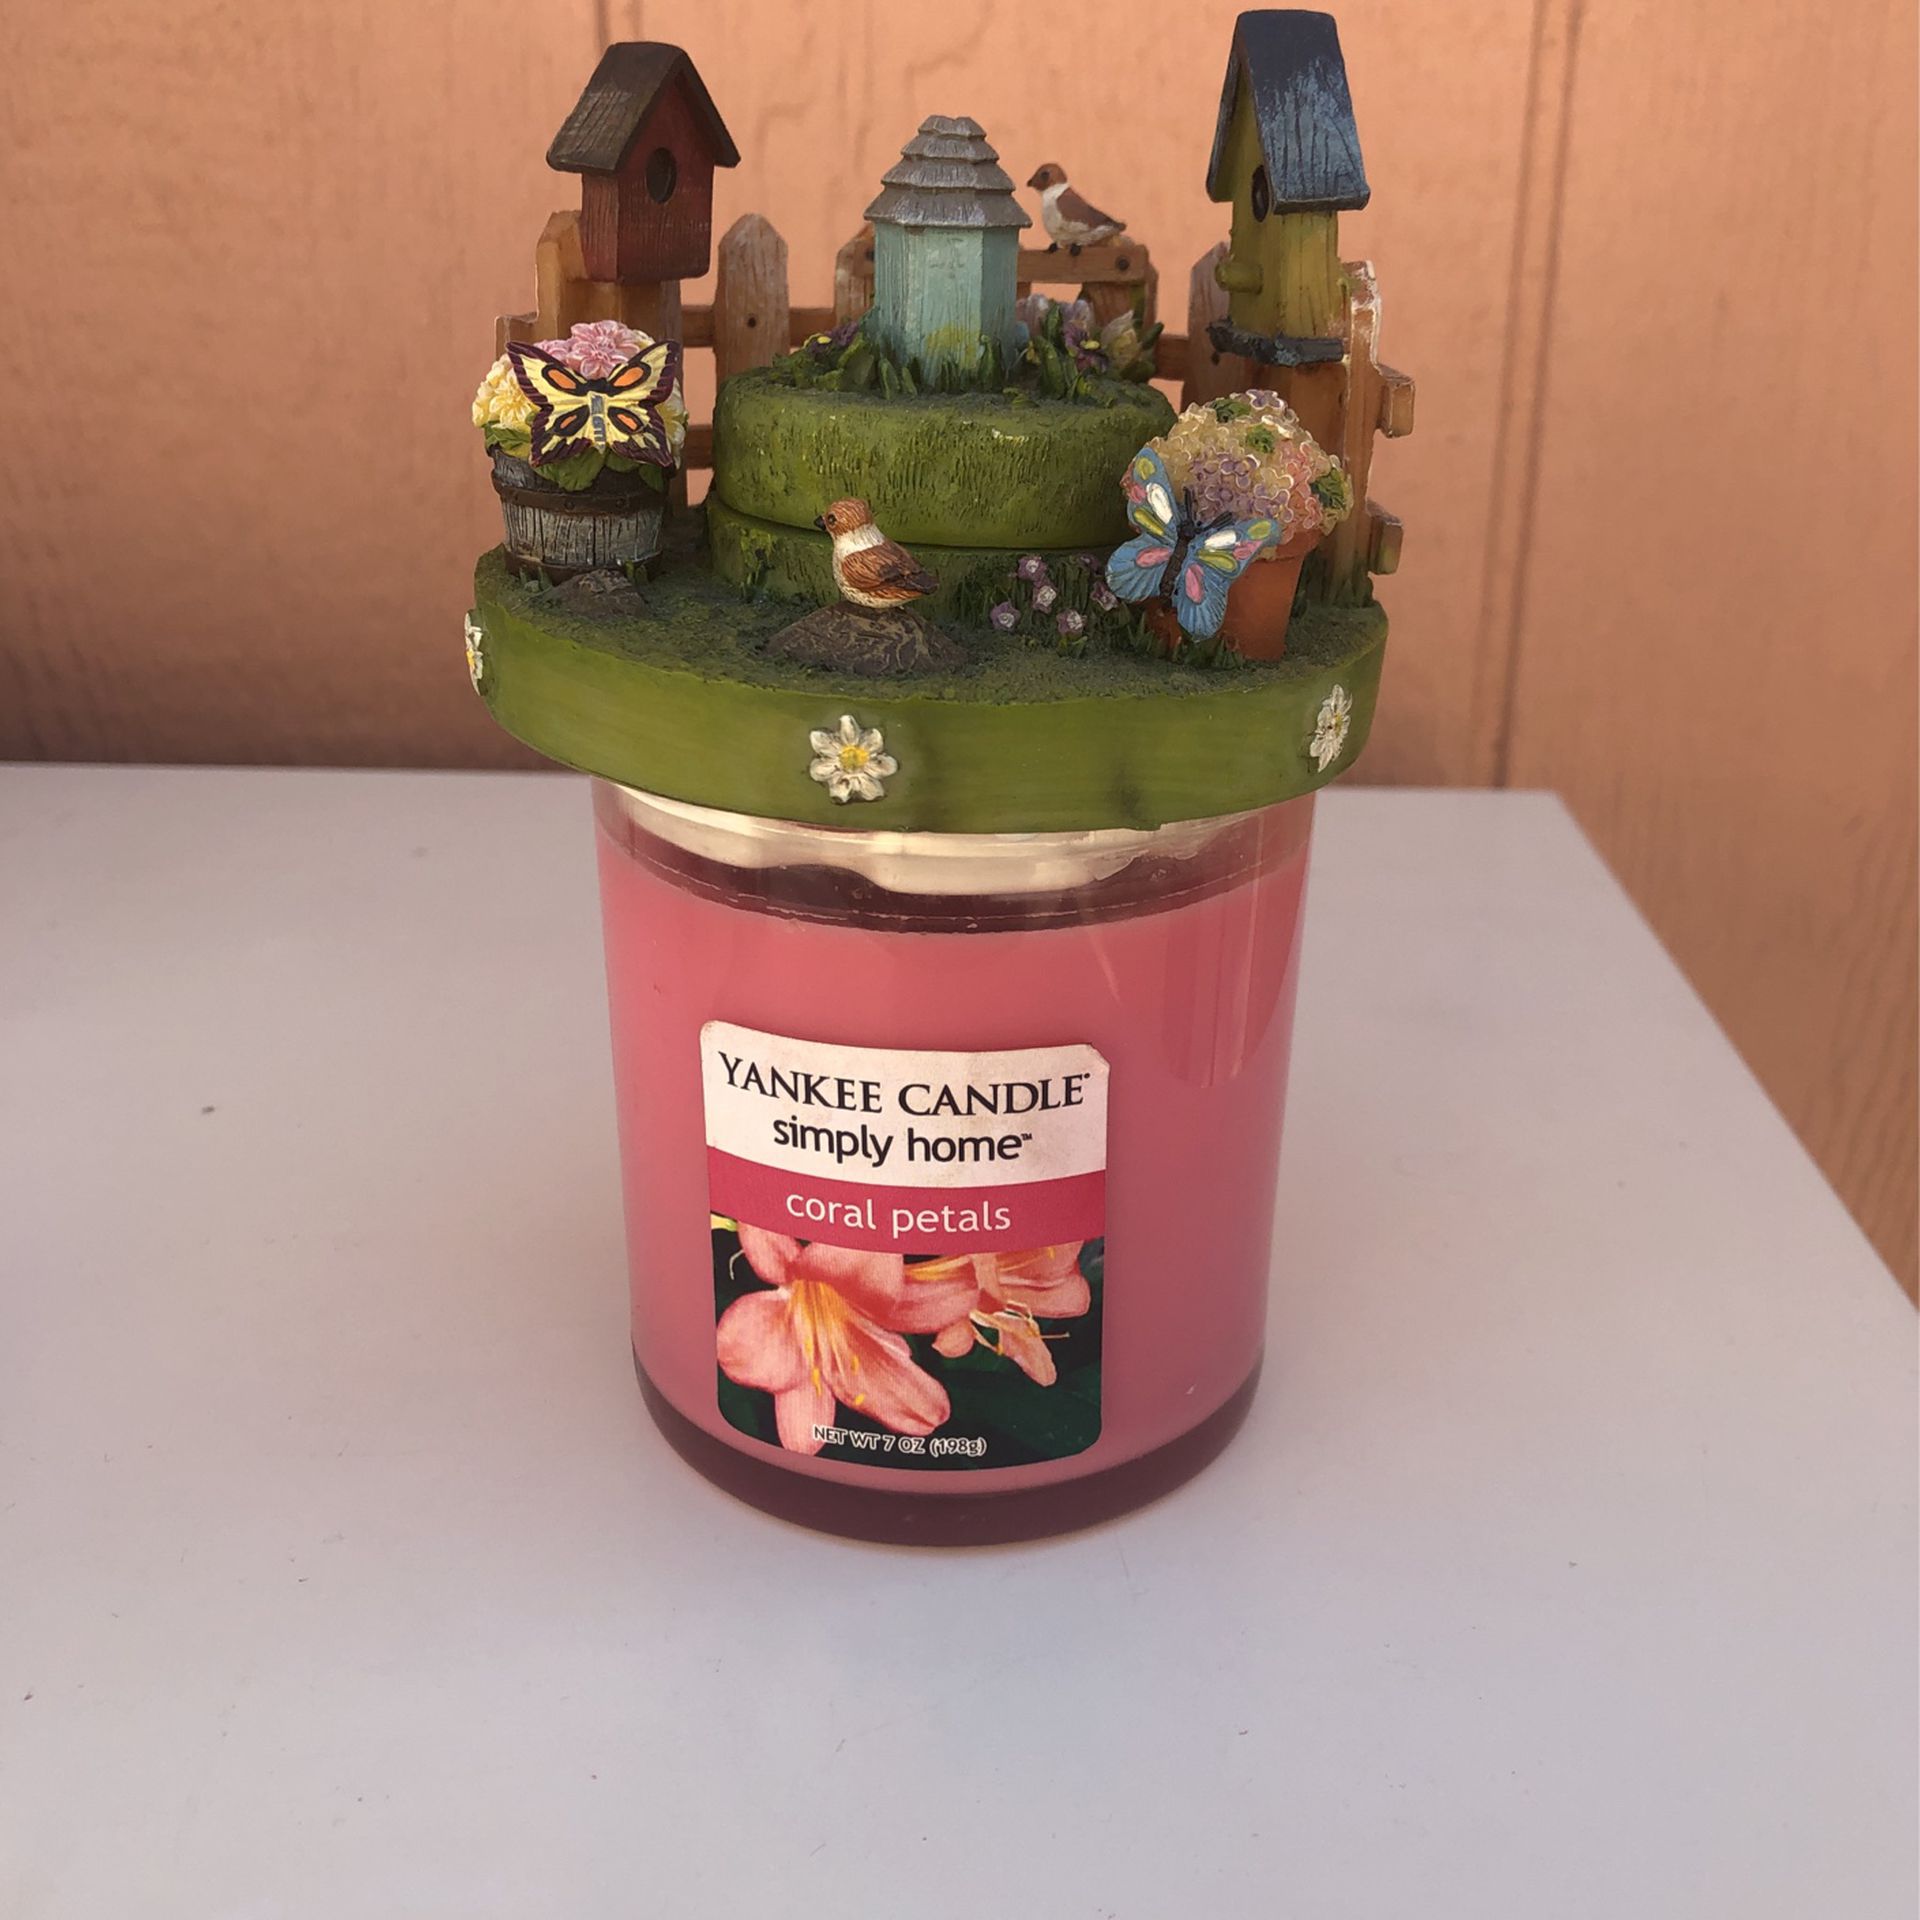 Yankee Candle Top Holder